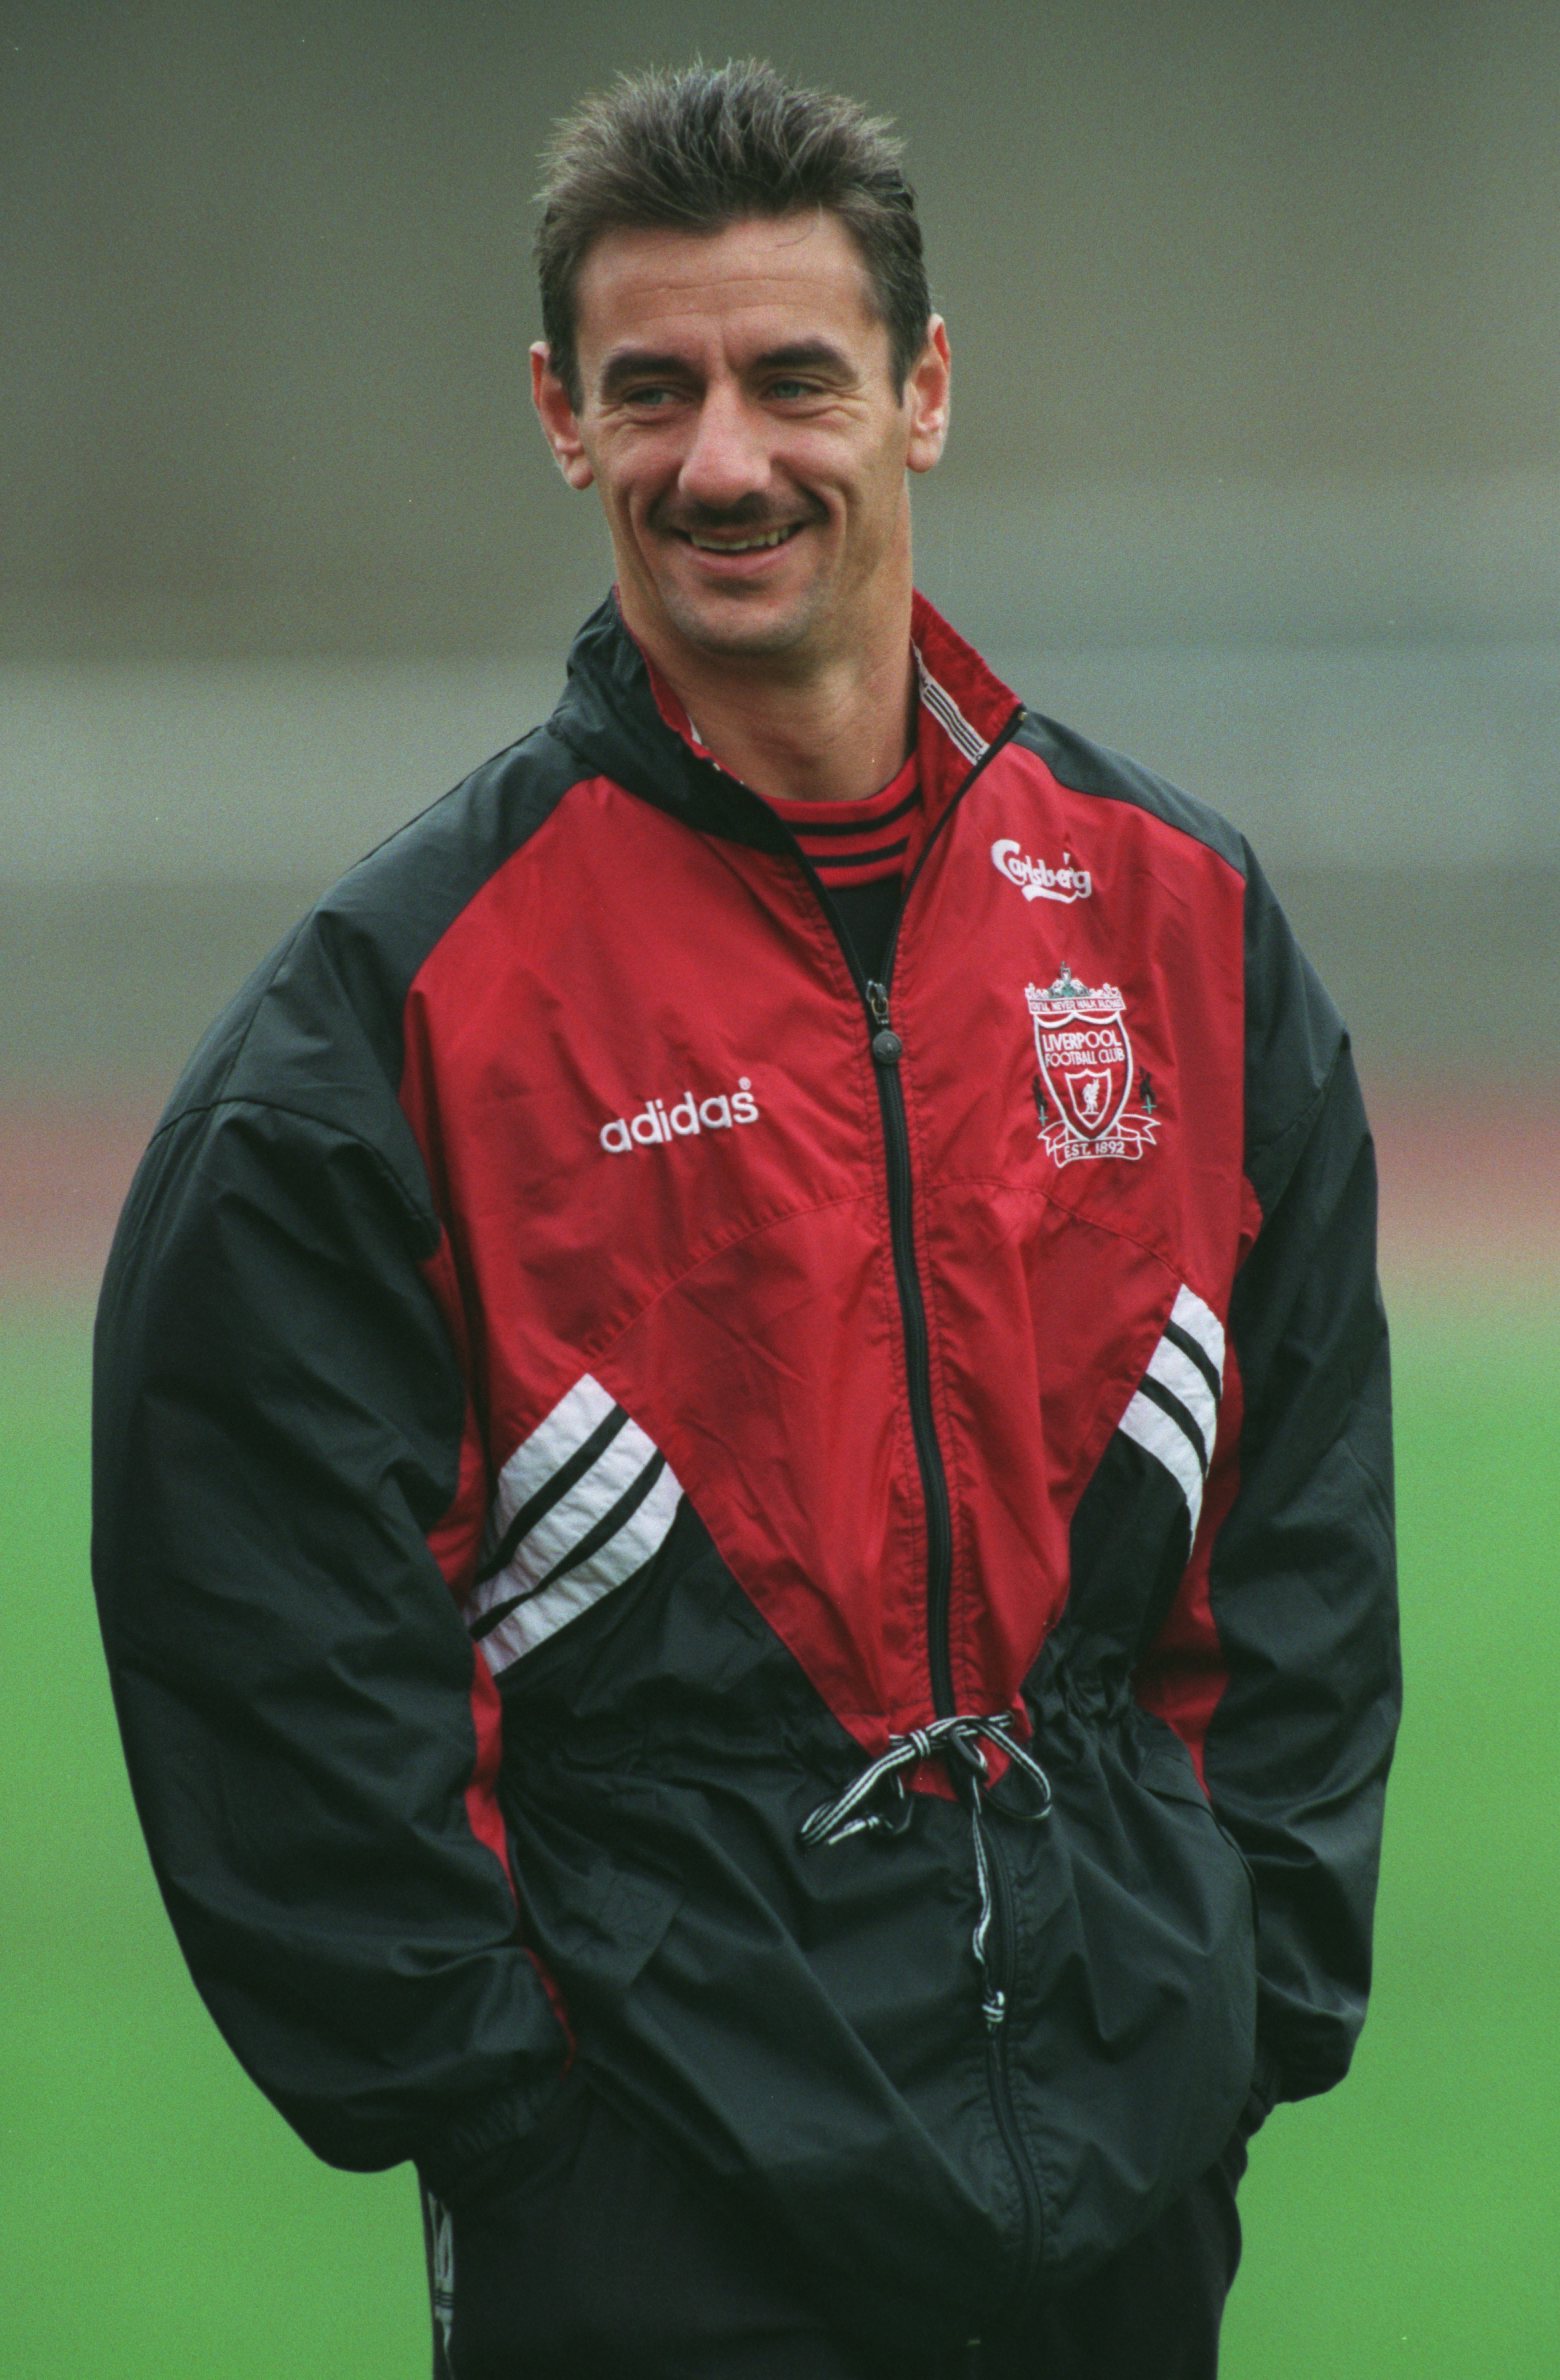 17 OCT 1995:  IAN RUSH OF LIVERPOOL INSPECTS THE PITCH BEFORE THE UEFA CUP 2ND ROUND MATCH AGAINST BRONDBY. THE MATCH ENDED 0-0. Mandatory Credit: Clive Brunskill/ALLSPORT